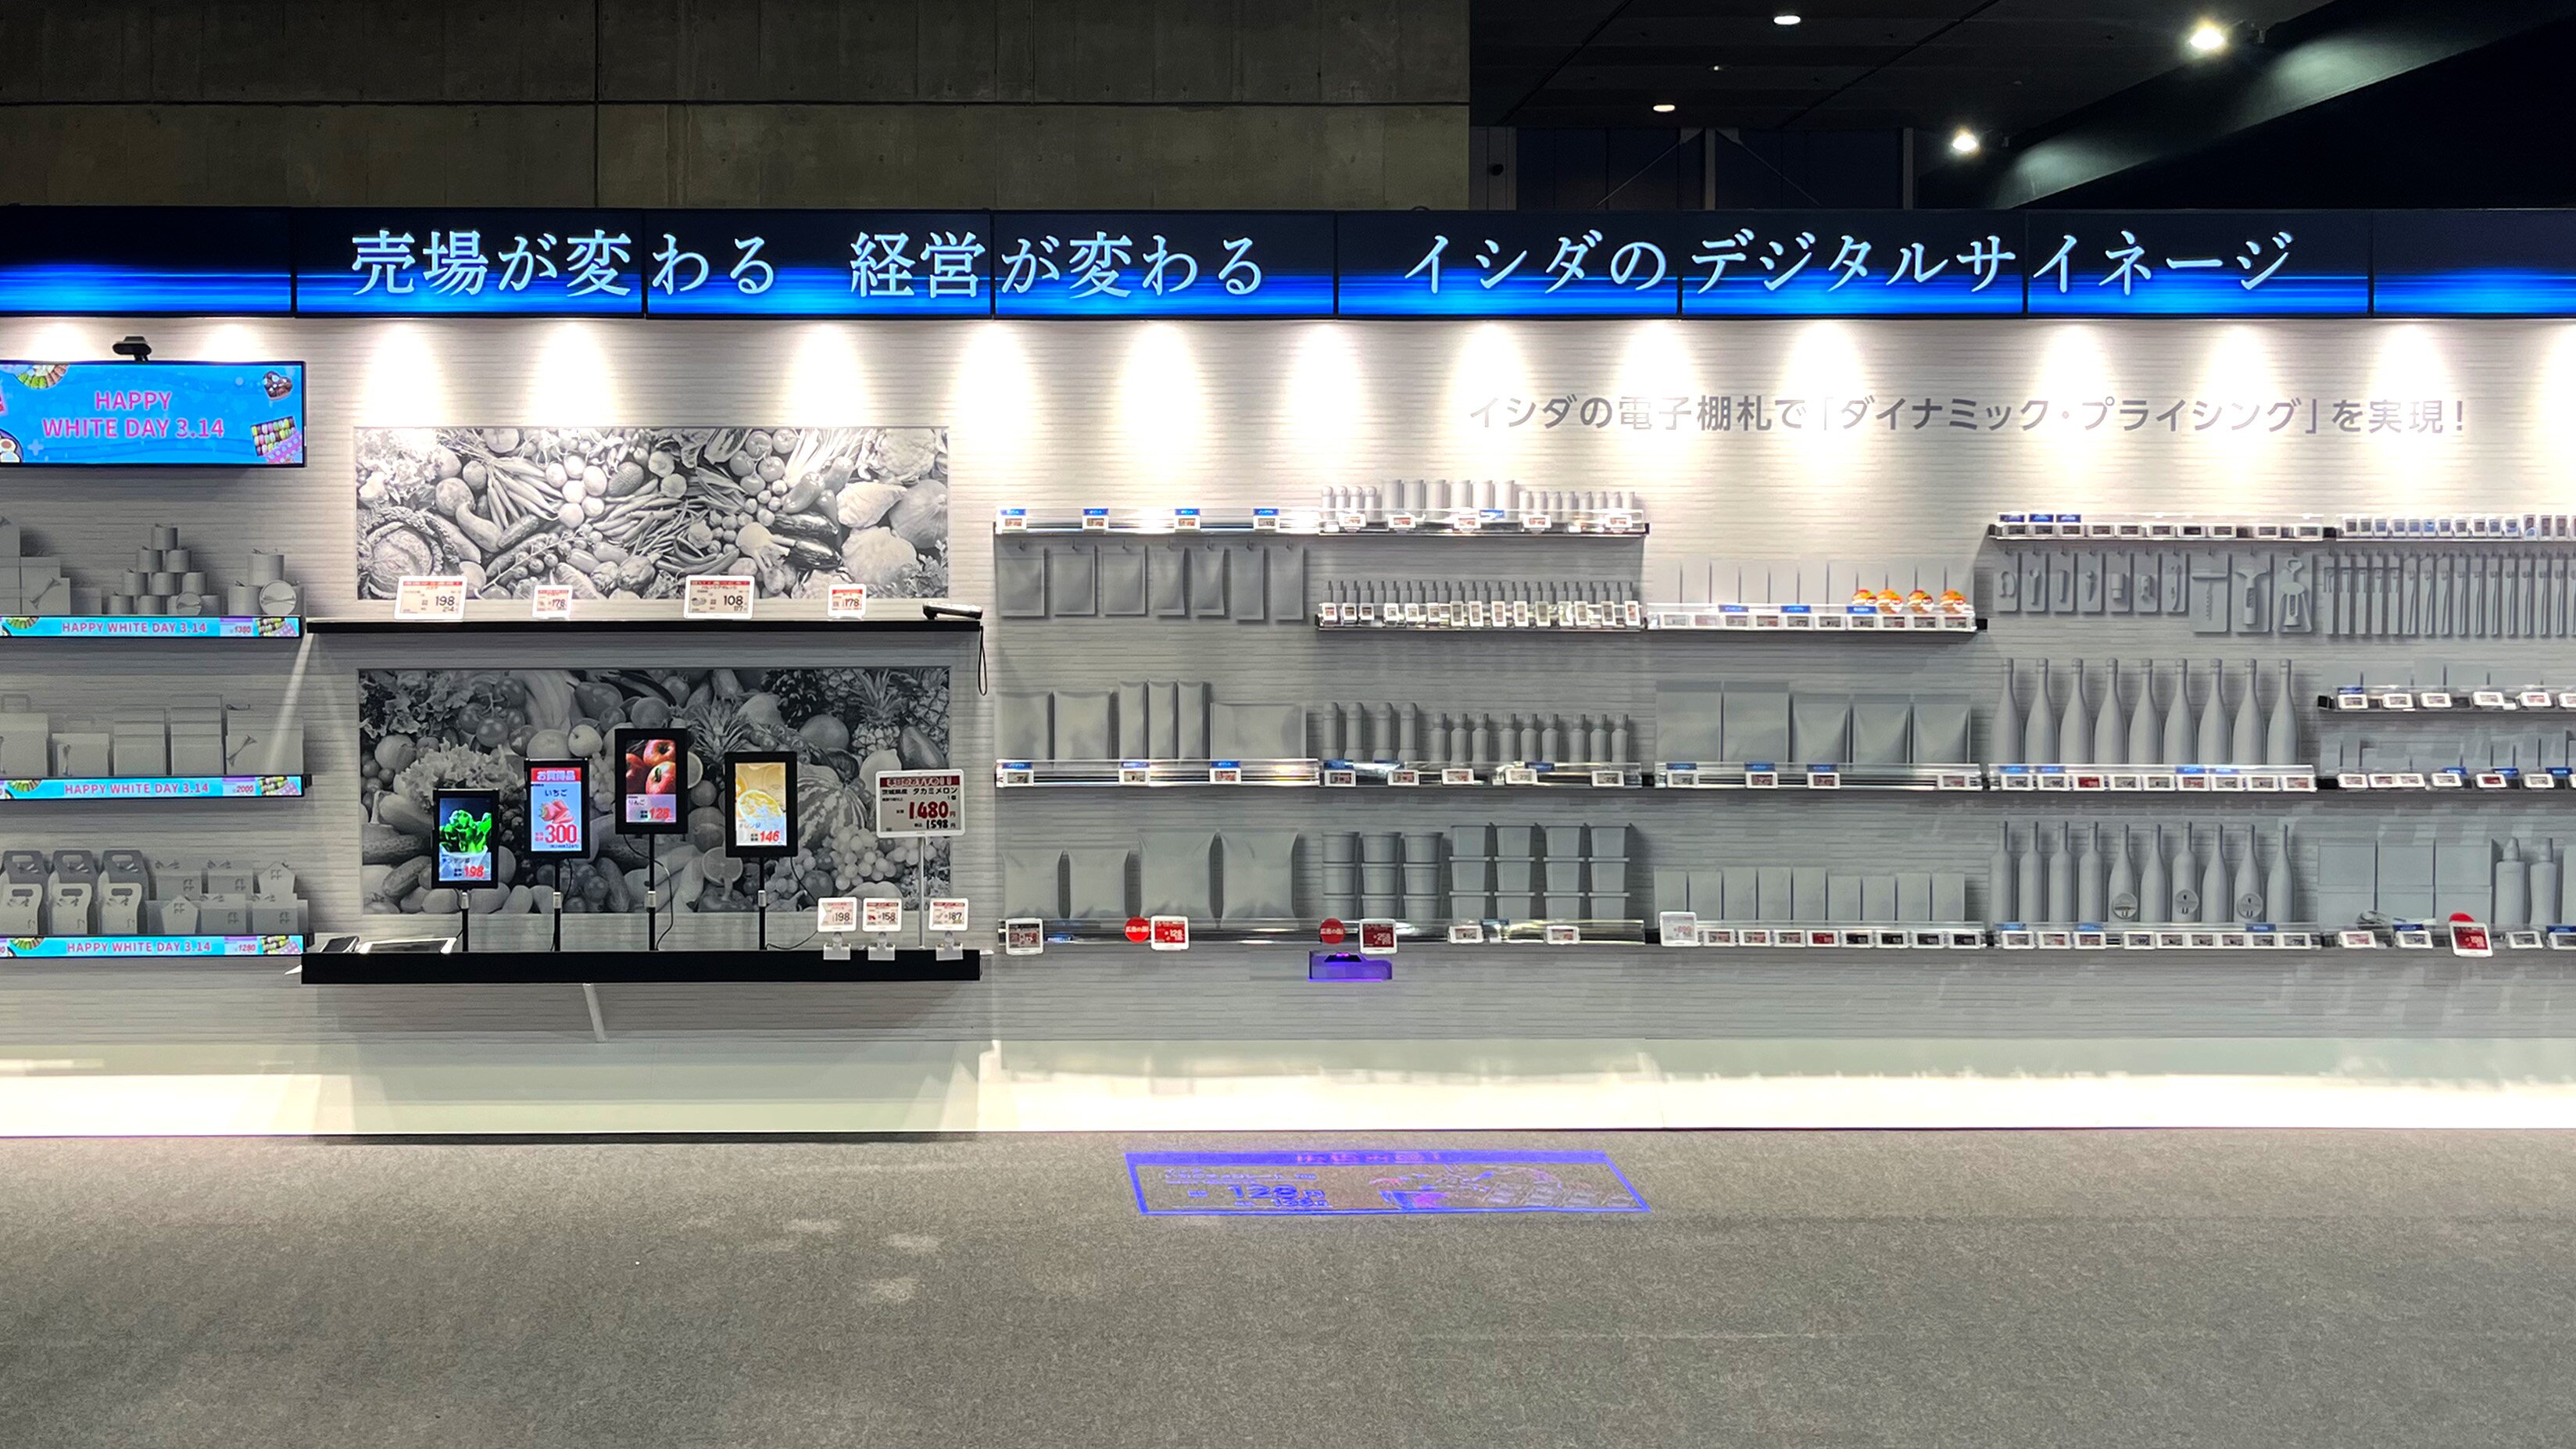 ISHIDA and Hanshow Jointly Present Digital Store Solutions at the 2023 Supermarket Trade Show (SMTS) in Japan